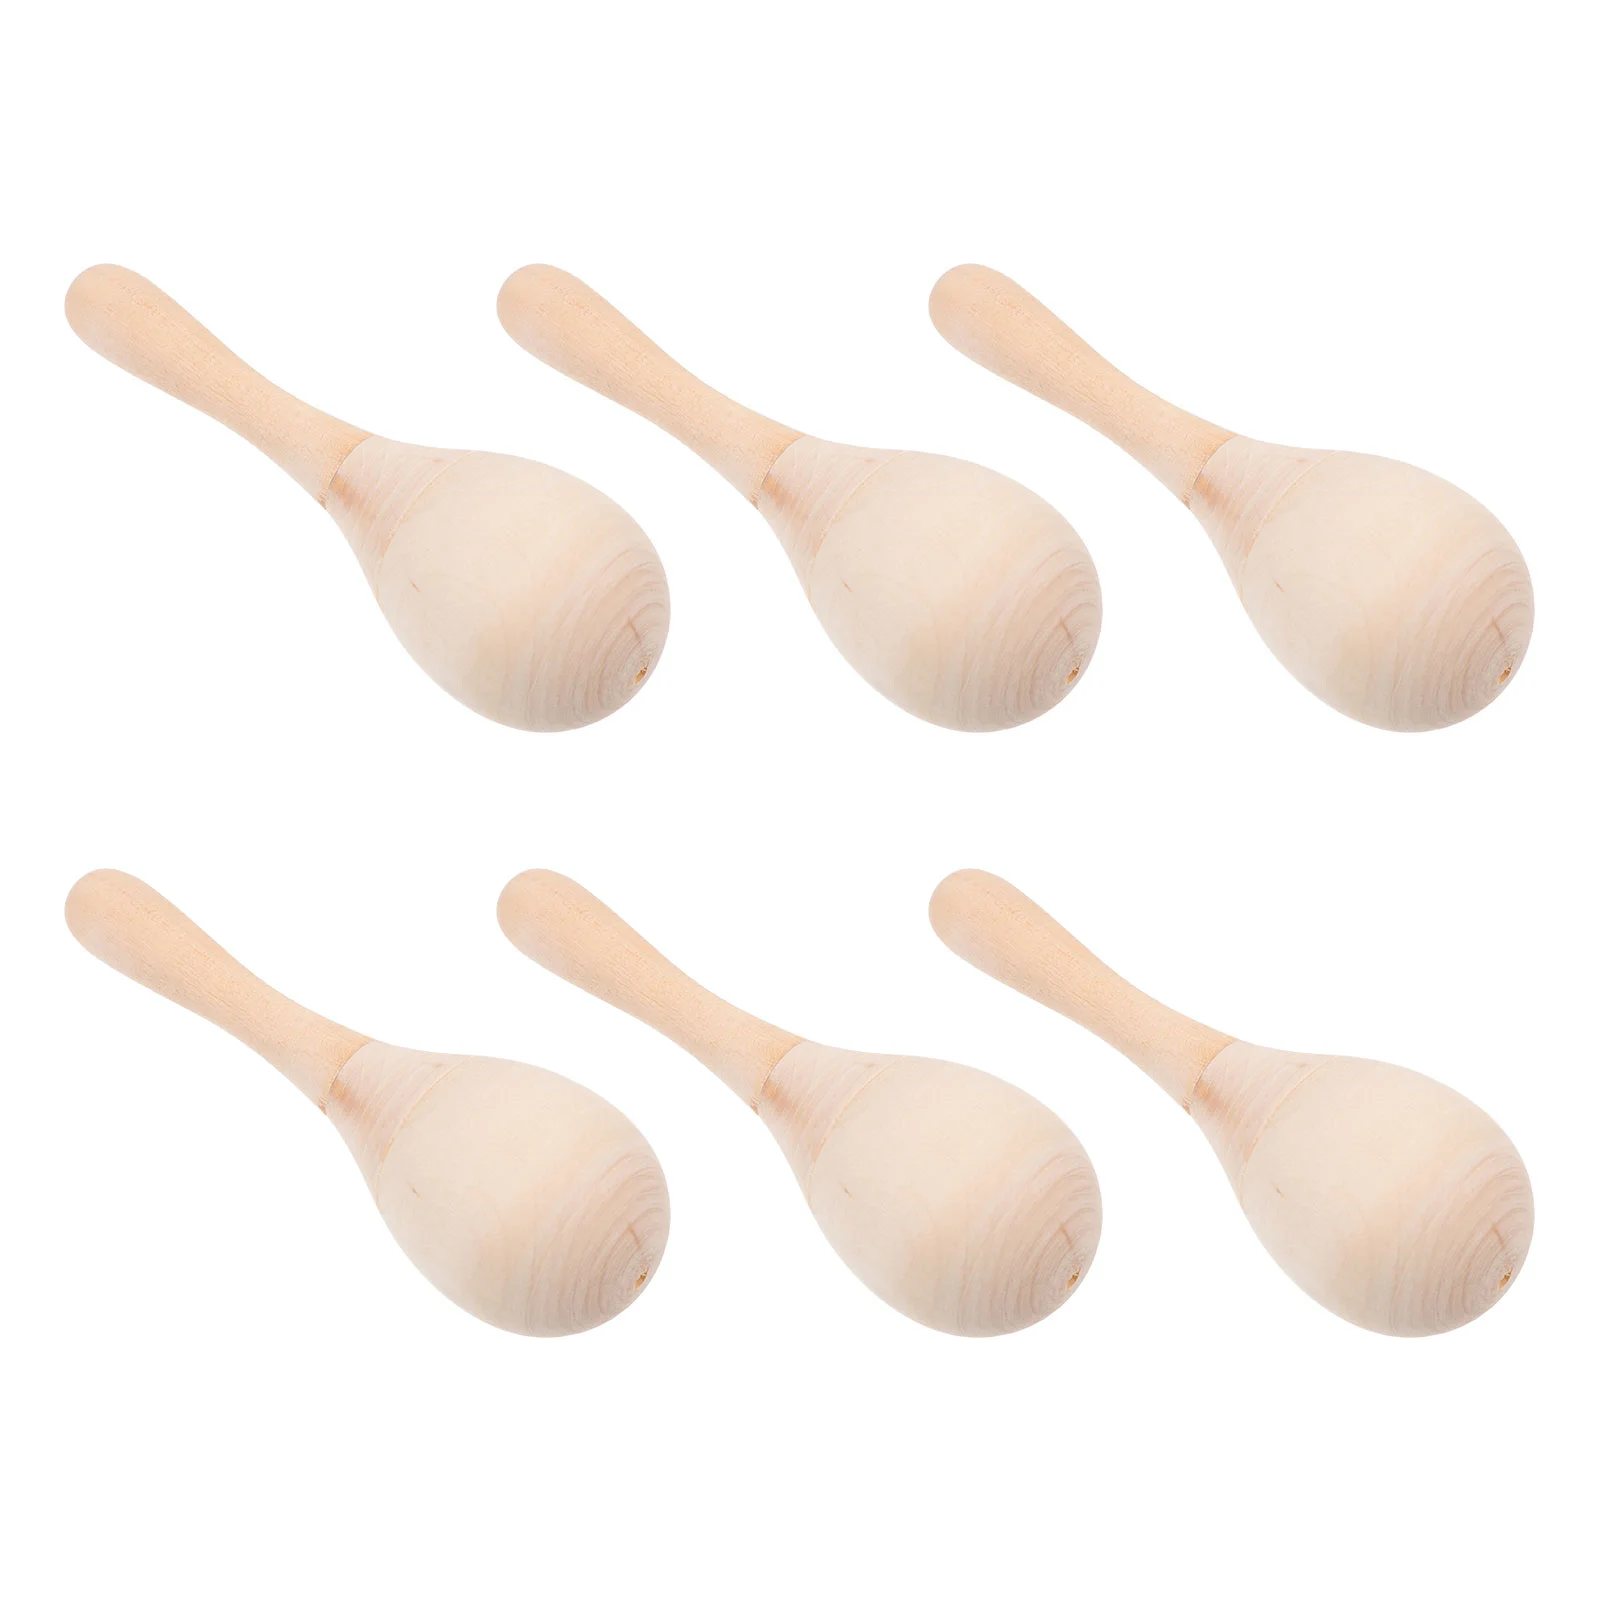 

10 Pcs Musical Toys Toddlers Kids Wood Instrument Gift Brain Maracas Shaking Hammer Puzzle Baby Shakers Percussion Log